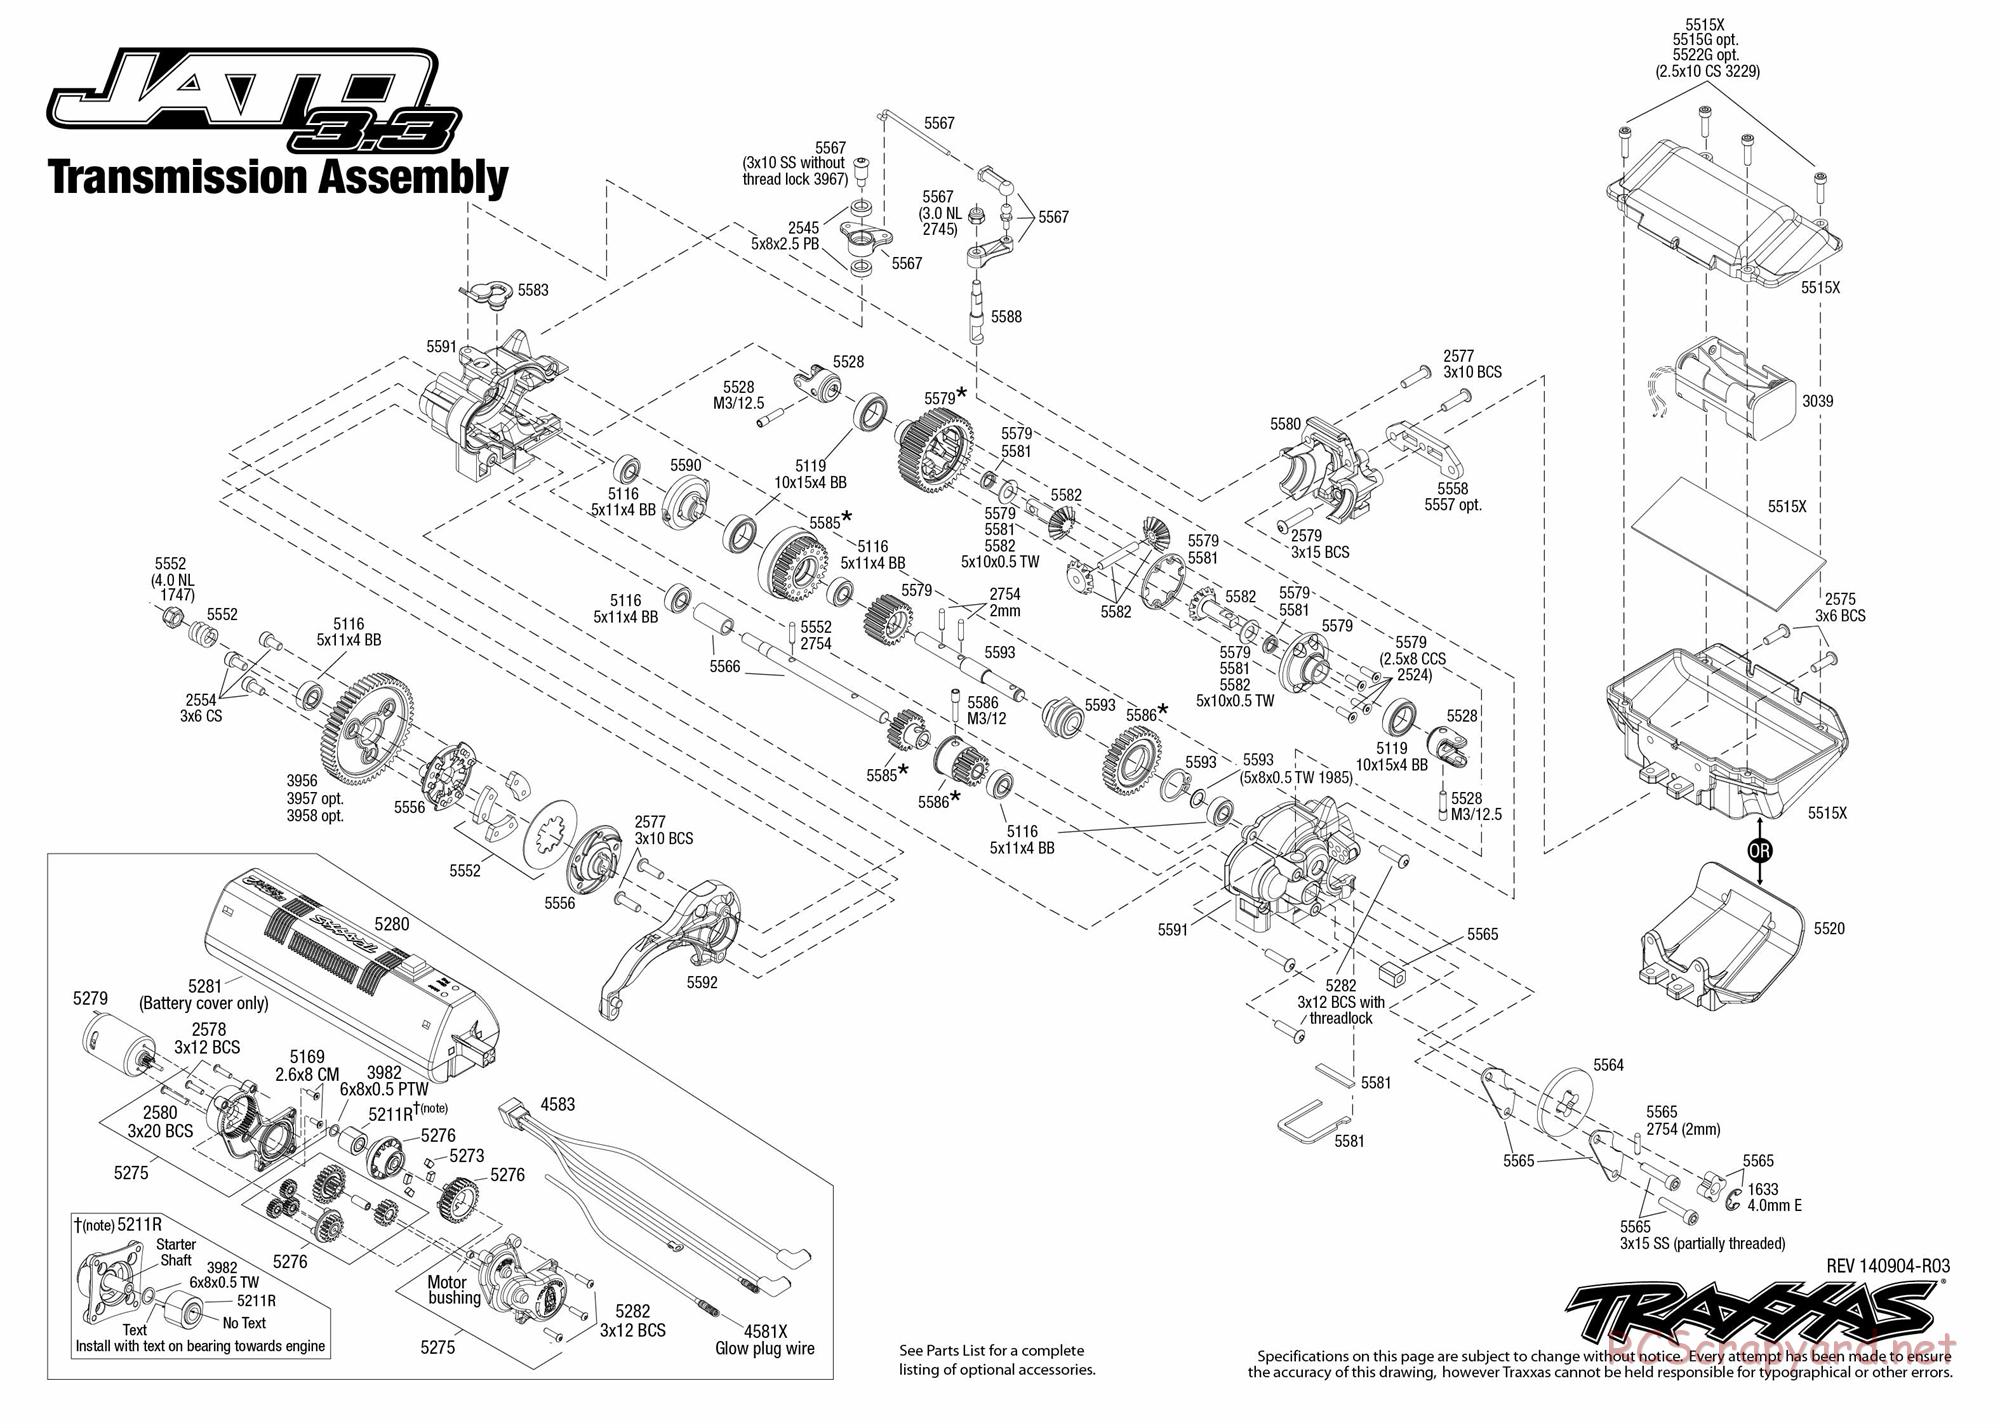 Traxxas - Jato 3.3 (2010) - Exploded Views - Page 5